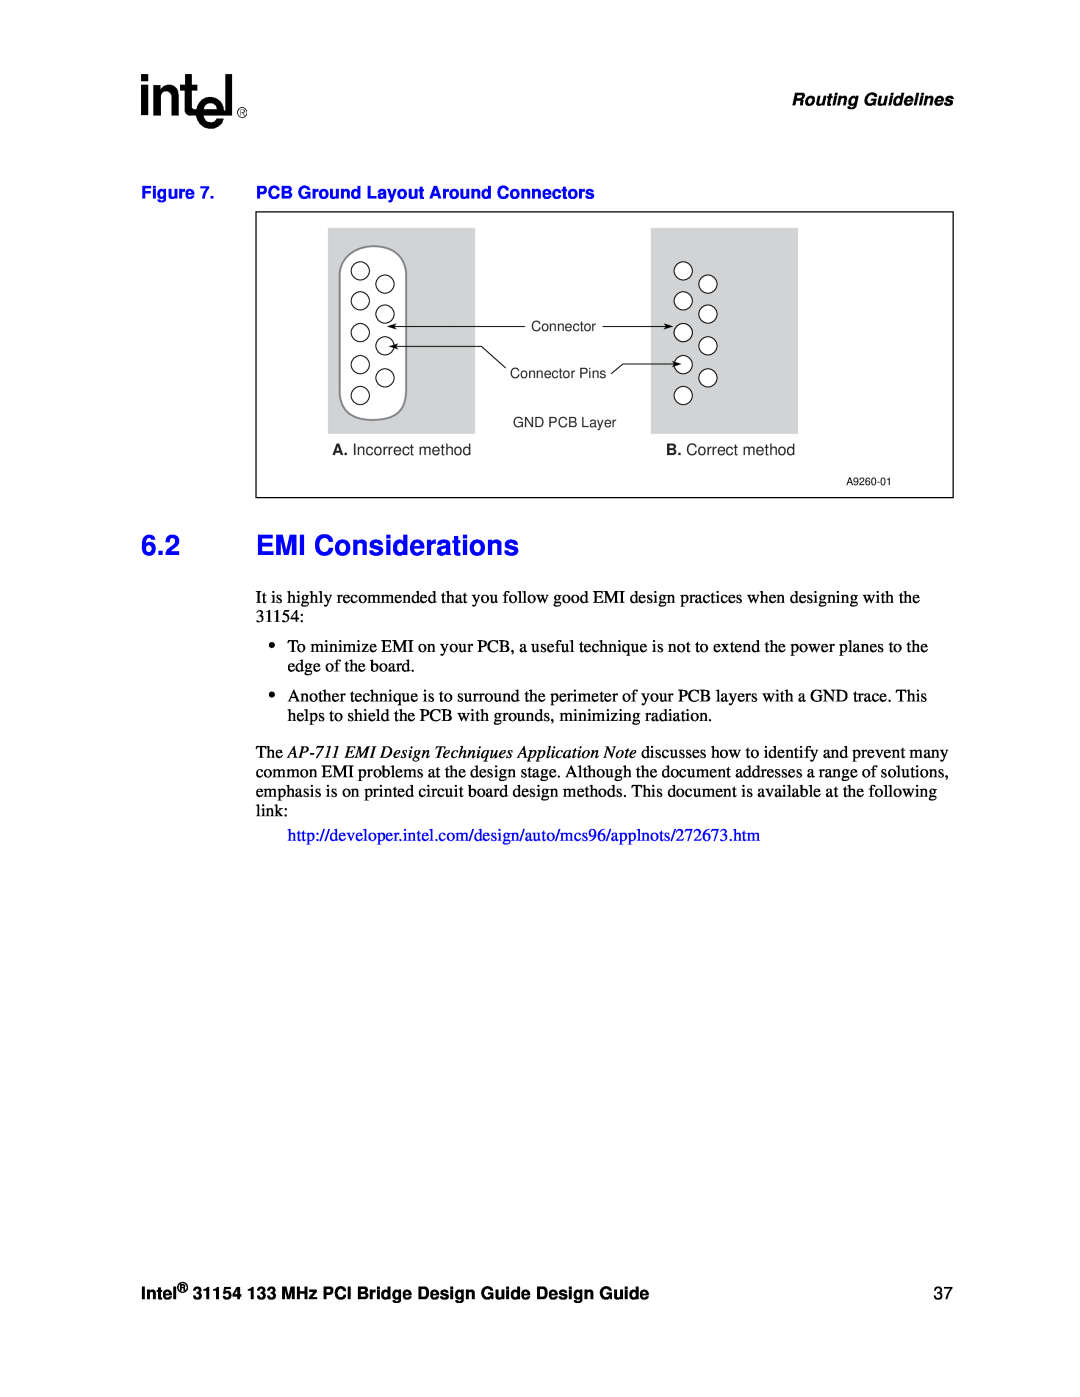 Intel 31154 manual EMI Considerations, PCB Ground Layout Around Connectors, Routing Guidelines 